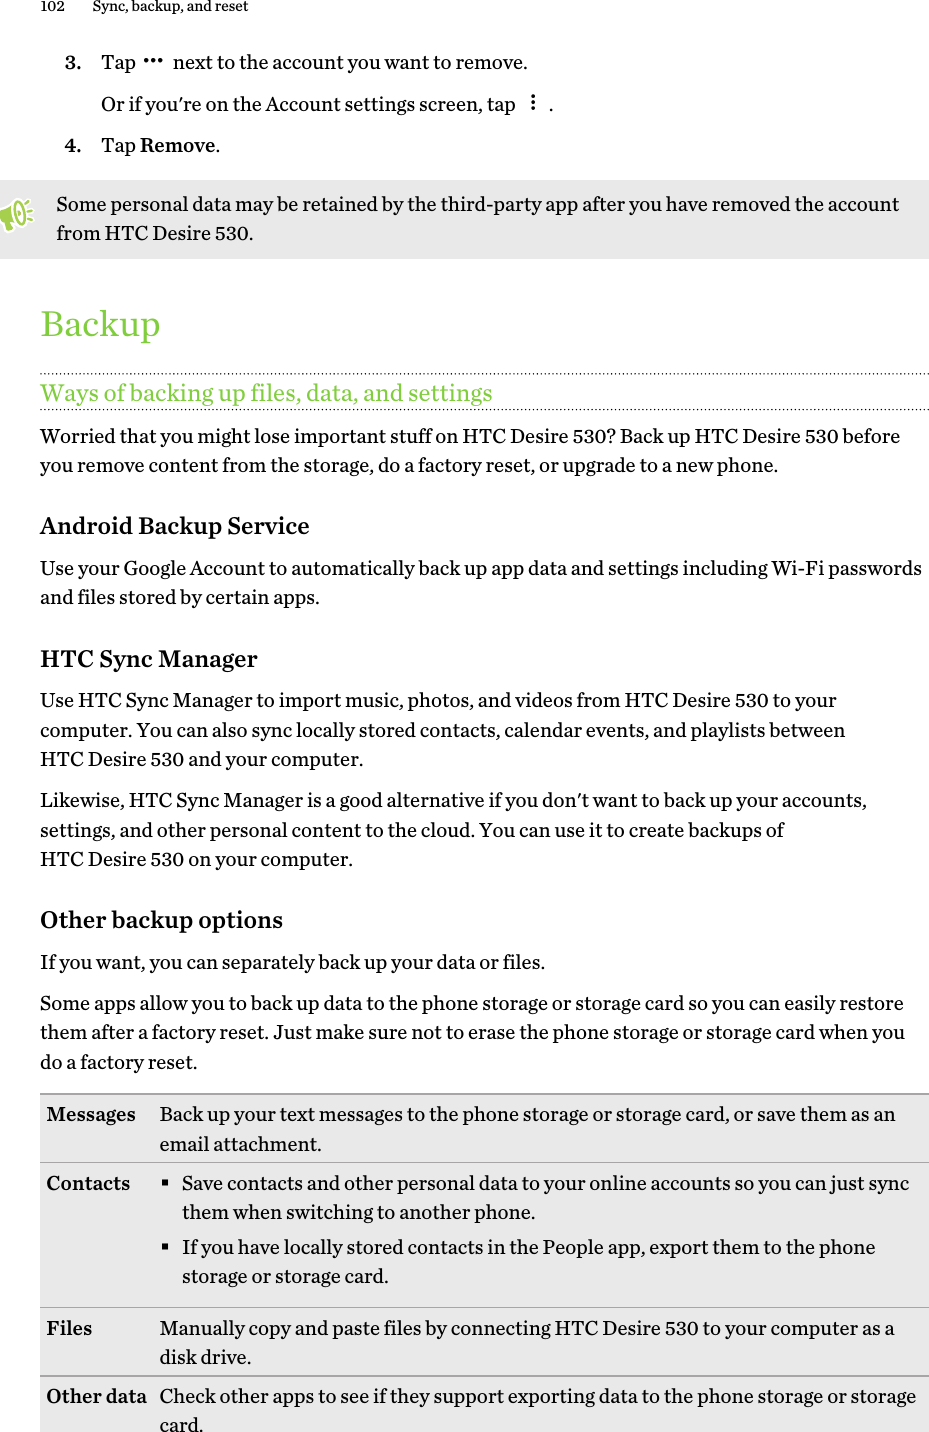 3. Tap   next to the account you want to remove. Or if you&apos;re on the Account settings screen, tap  .4. Tap Remove.Some personal data may be retained by the third-party app after you have removed the accountfrom HTC Desire 530.BackupWays of backing up files, data, and settingsWorried that you might lose important stuff on HTC Desire 530? Back up HTC Desire 530 beforeyou remove content from the storage, do a factory reset, or upgrade to a new phone.Android Backup ServiceUse your Google Account to automatically back up app data and settings including Wi-Fi passwordsand files stored by certain apps.HTC Sync ManagerUse HTC Sync Manager to import music, photos, and videos from HTC Desire 530 to yourcomputer. You can also sync locally stored contacts, calendar events, and playlists betweenHTC Desire 530 and your computer.Likewise, HTC Sync Manager is a good alternative if you don&apos;t want to back up your accounts,settings, and other personal content to the cloud. You can use it to create backups ofHTC Desire 530 on your computer.Other backup optionsIf you want, you can separately back up your data or files.Some apps allow you to back up data to the phone storage or storage card so you can easily restorethem after a factory reset. Just make sure not to erase the phone storage or storage card when youdo a factory reset.Messages Back up your text messages to the phone storage or storage card, or save them as anemail attachment.Contacts §Save contacts and other personal data to your online accounts so you can just syncthem when switching to another phone.§If you have locally stored contacts in the People app, export them to the phonestorage or storage card.Files Manually copy and paste files by connecting HTC Desire 530 to your computer as adisk drive.Other data Check other apps to see if they support exporting data to the phone storage or storagecard.102 Sync, backup, and reset